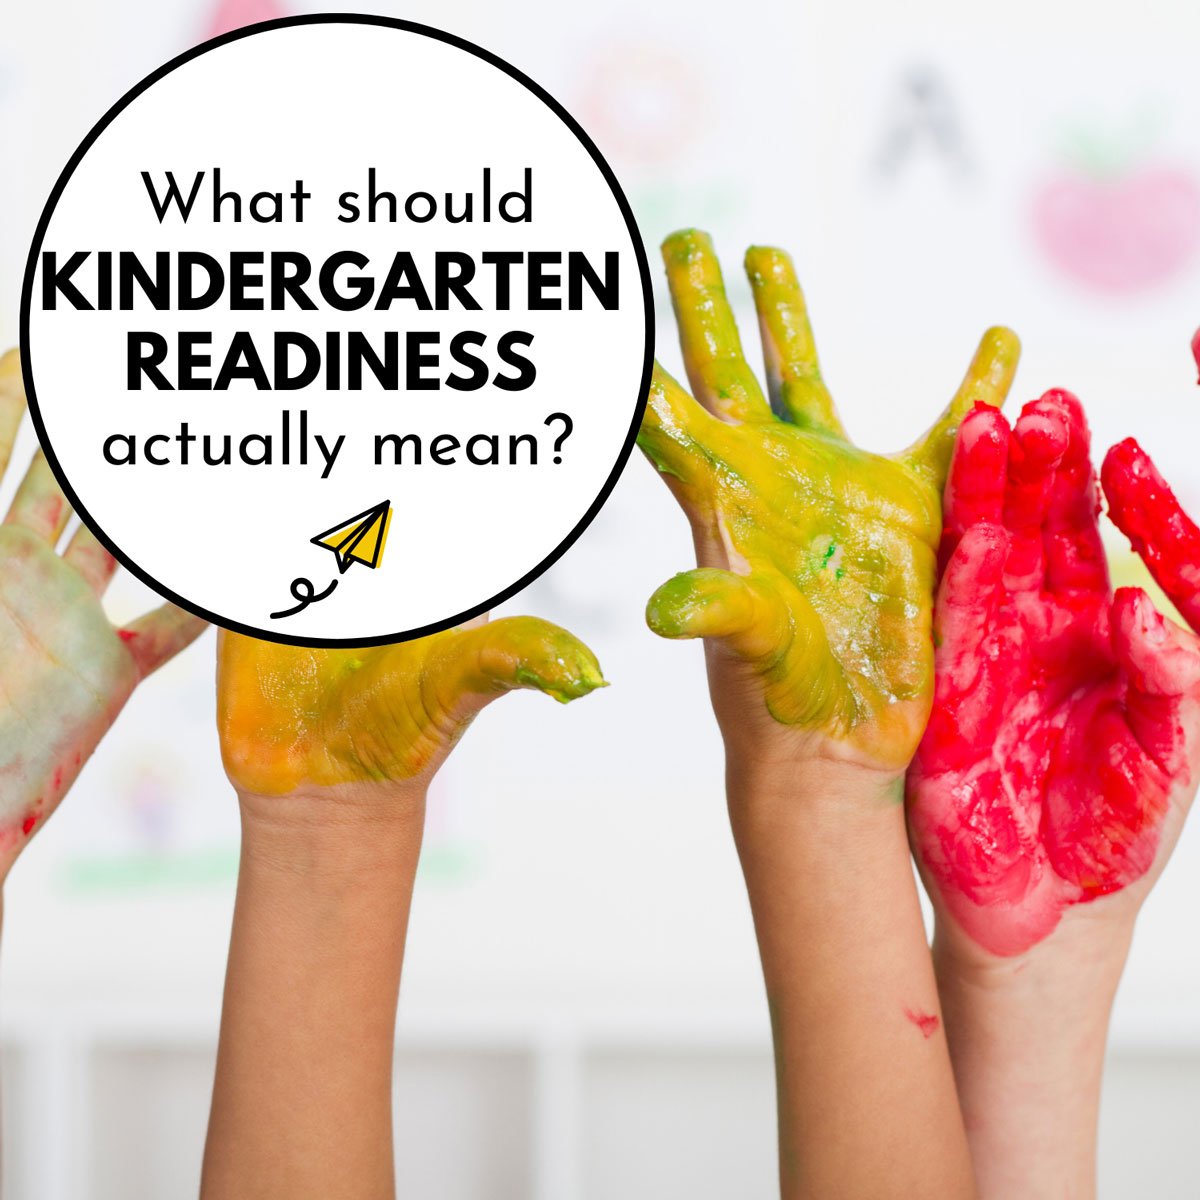 Kid hands covered in paint are raised in the air. The text says "What should kindergarten readiness actually mean?"